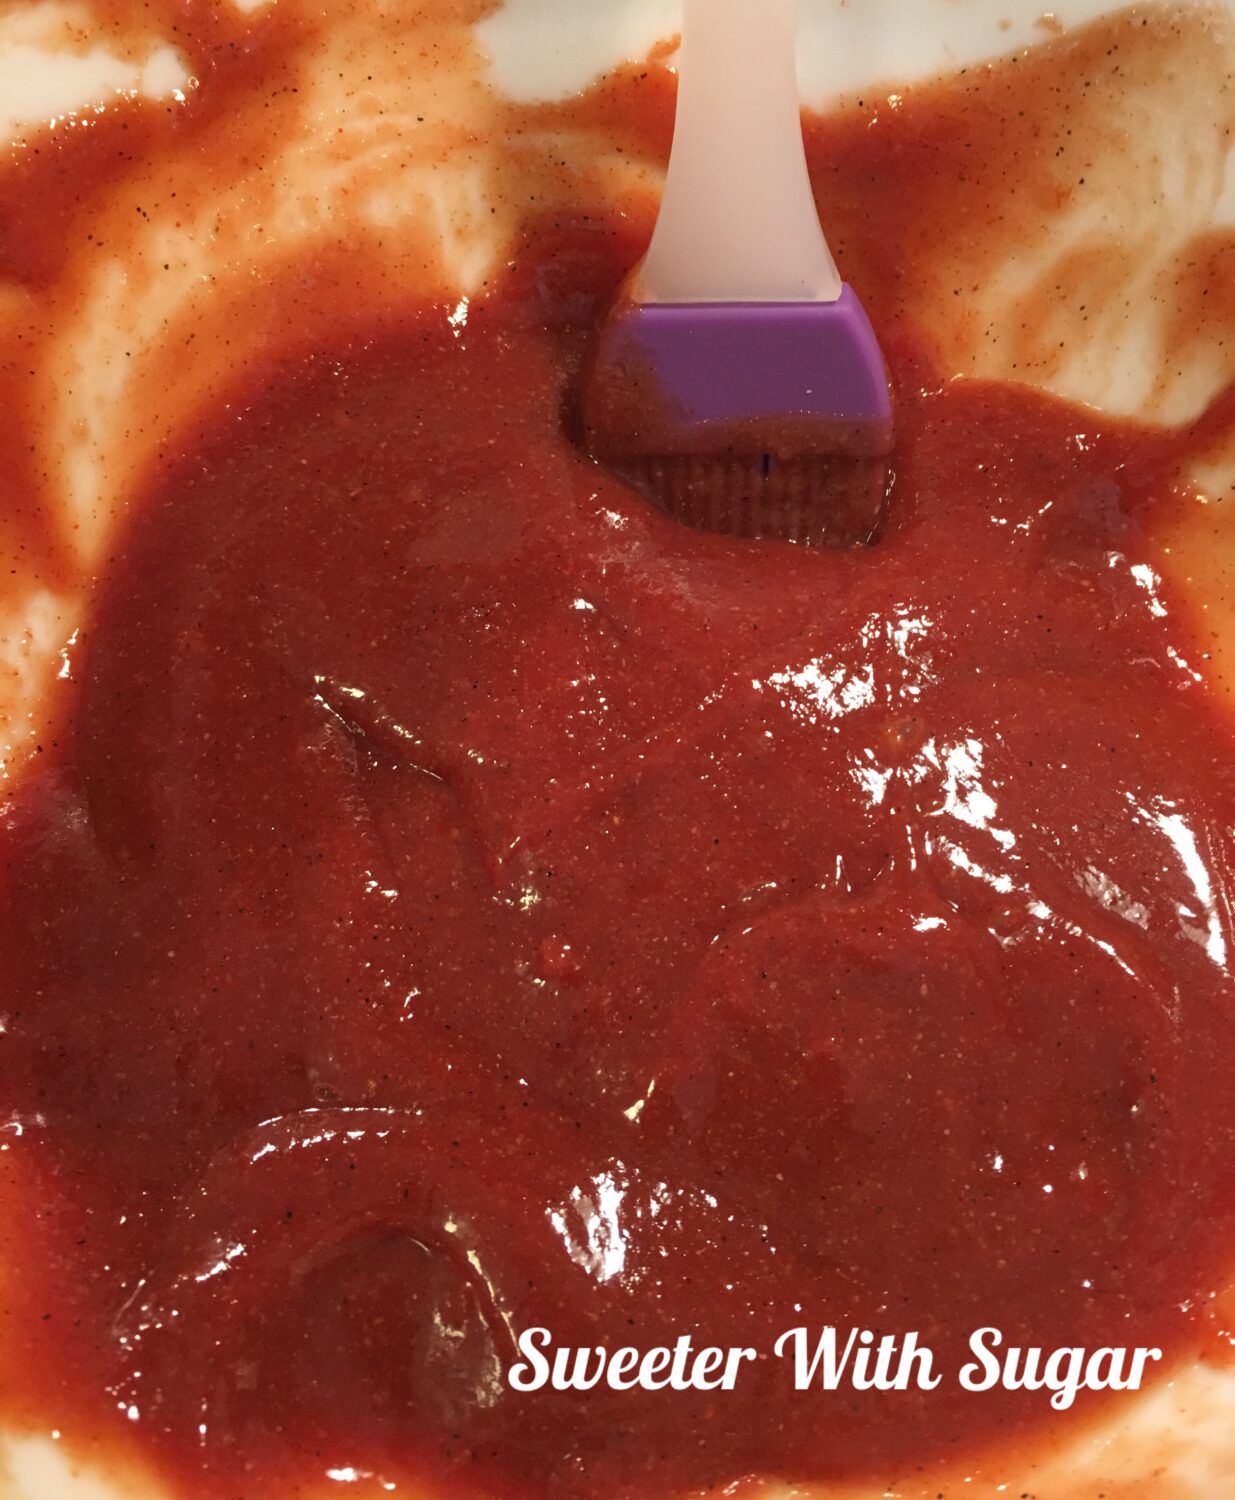 Homemade Barbecue Sauce | Sweeter With. Sugar | A simple and delicious homemade barbecue sauce. Sauces, Barbecue Sauce, Homemade, Simple, #BarbecueSauce #Homemade #SauceRecipes